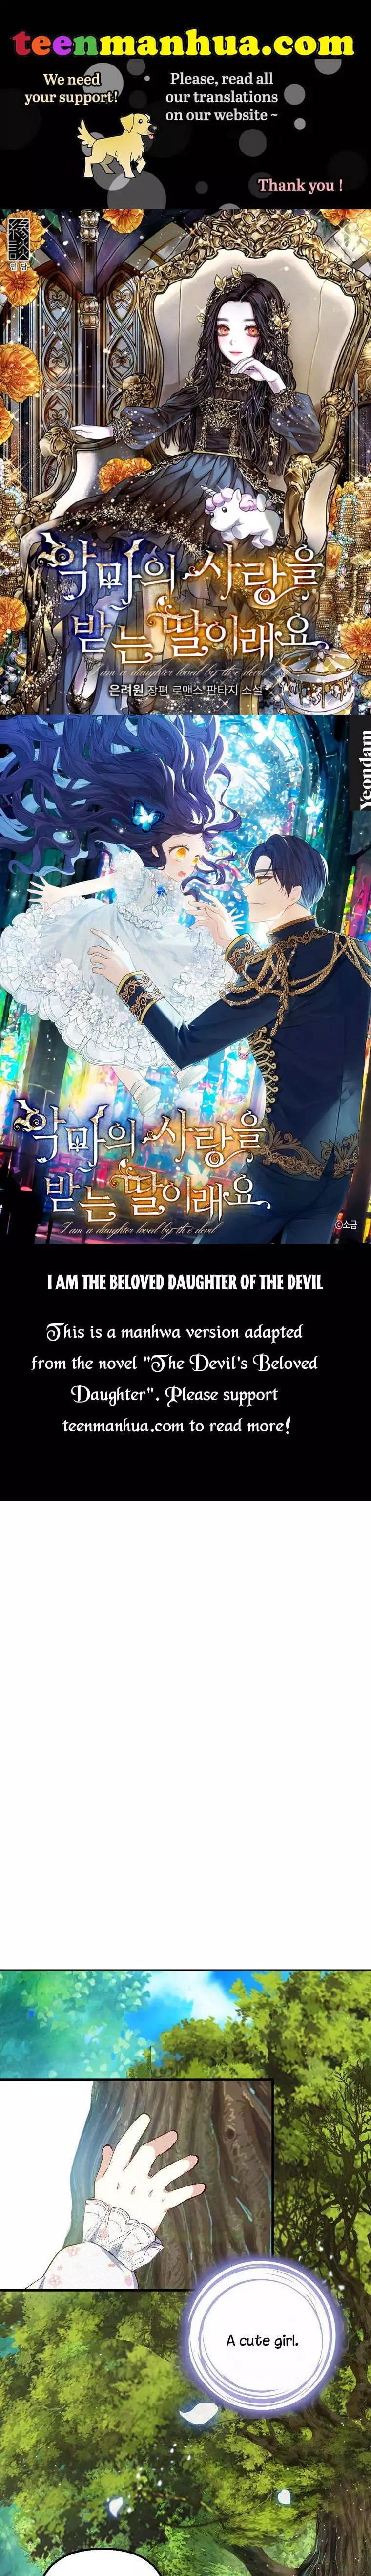 I Am A Daughter Loved By The Devil - 20 page 1-2350e636